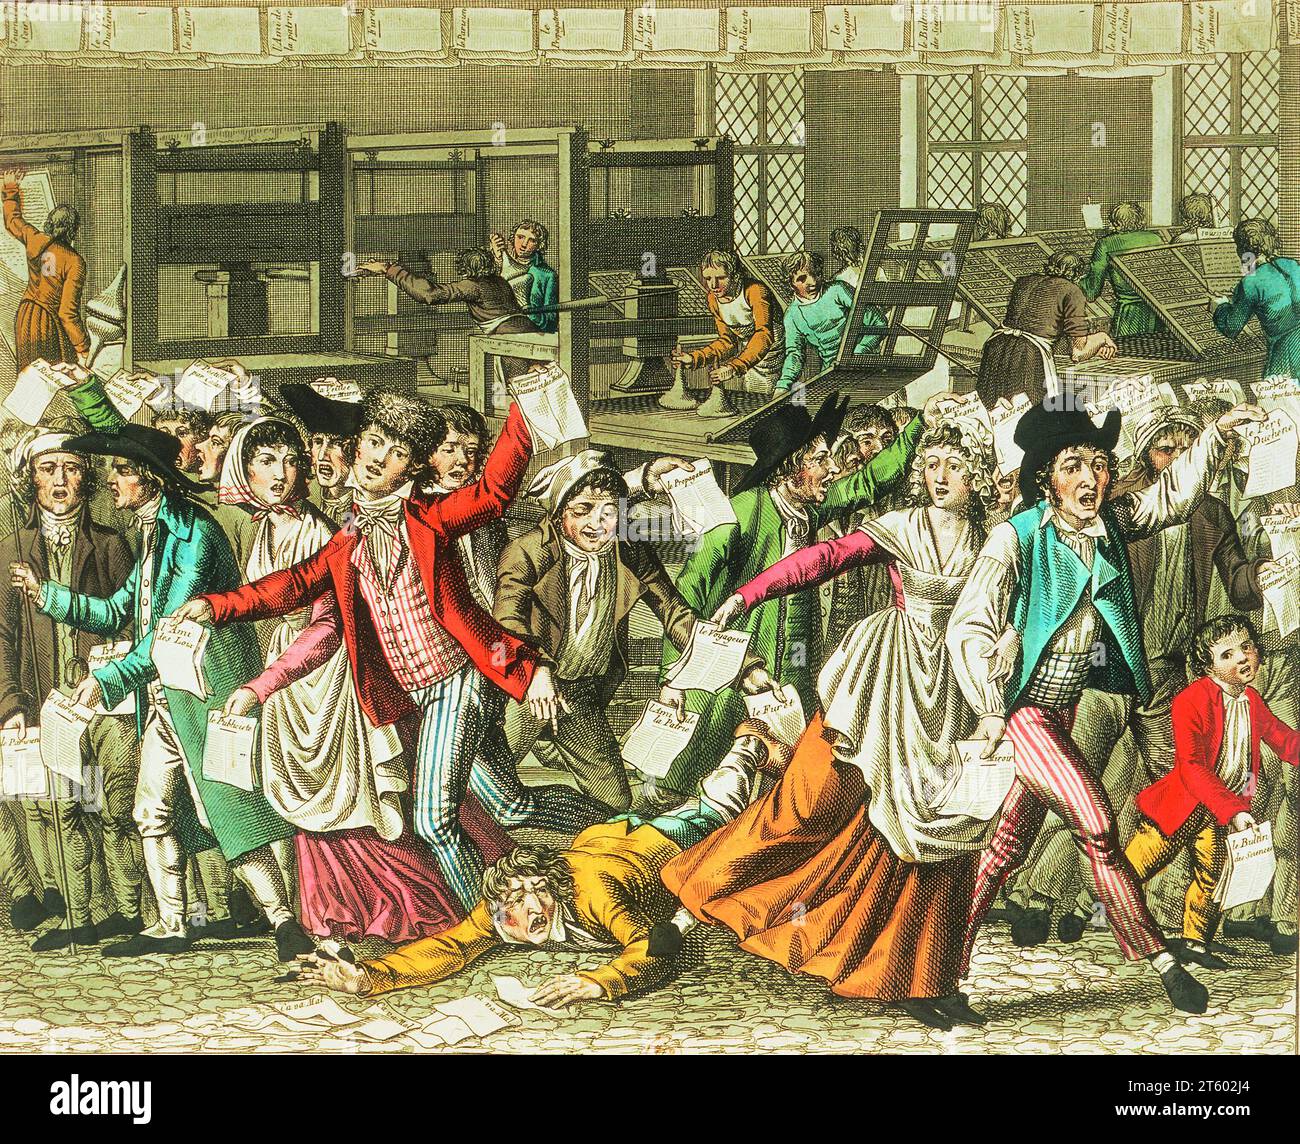 Title: The Freedom of the Press Creator: Unknown/Unspecified (Artist's name not provided) Year: 1797 Medium: Colored engraving Dimensions: Not specified Location: Bibliotheque Nationale, Paris, France Stock Photo